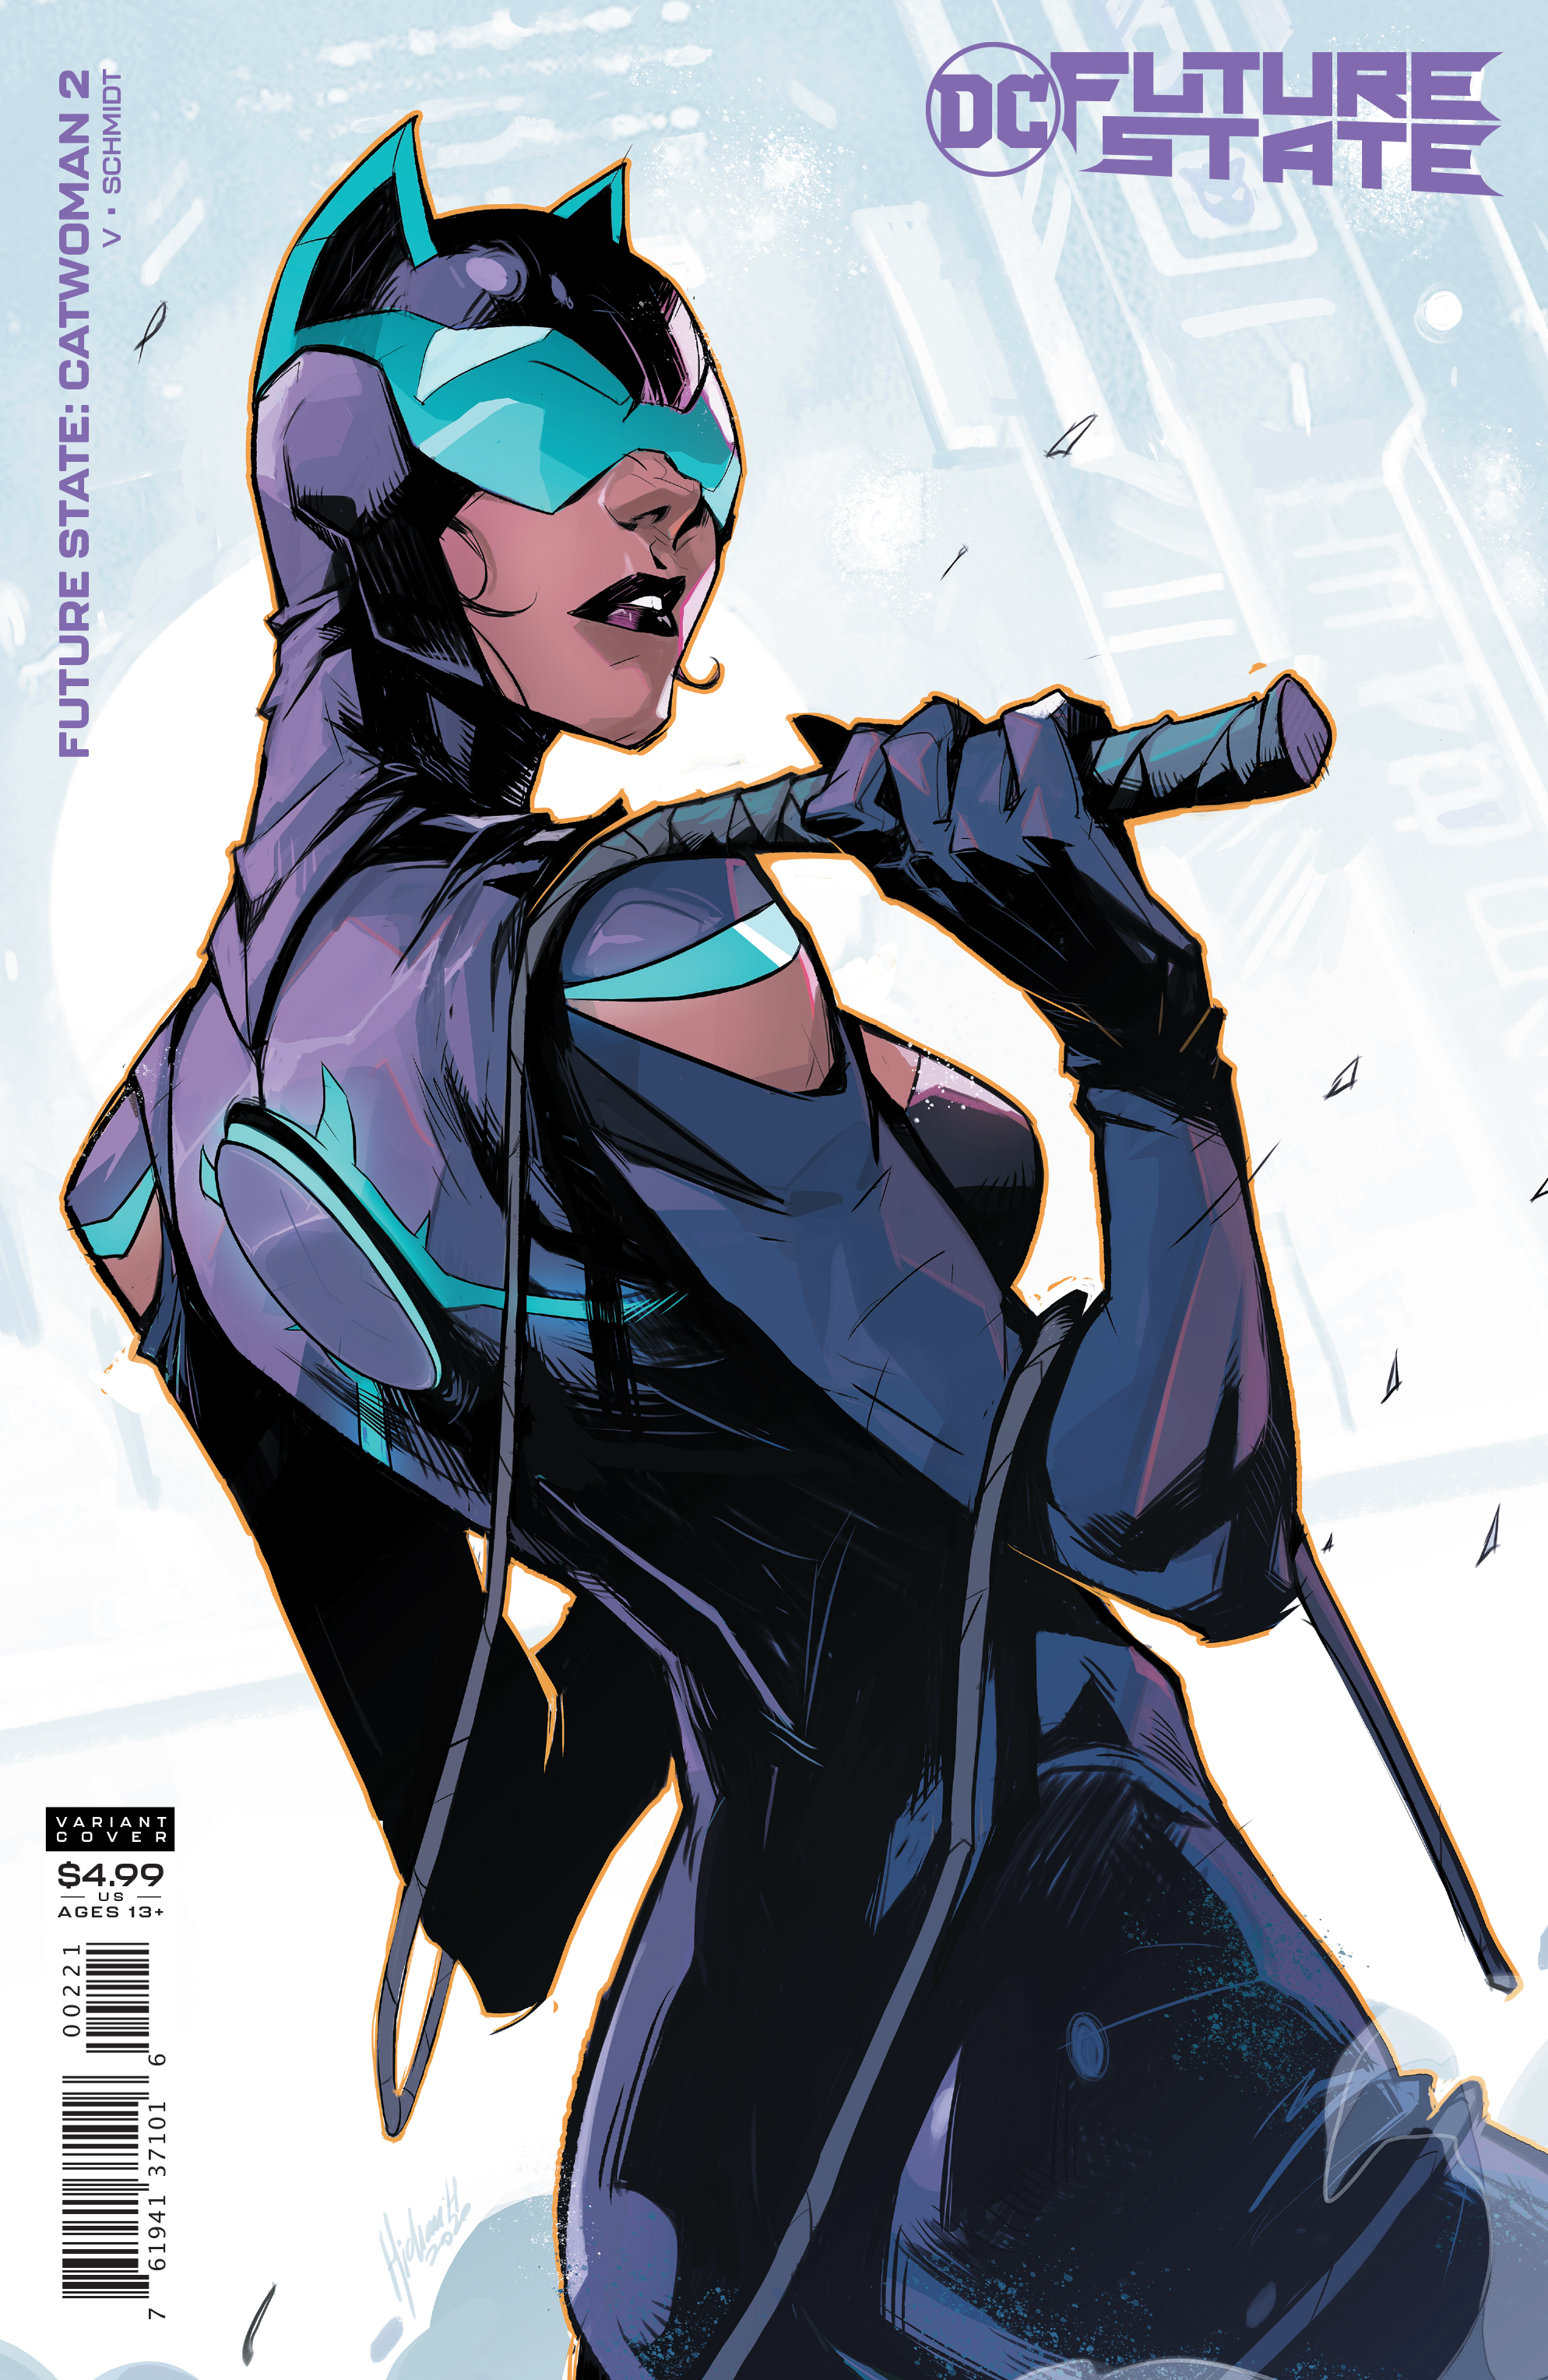 Future State Catwoman #2 Cover B Hicham Habchi Card Stock Variant (Of 2)